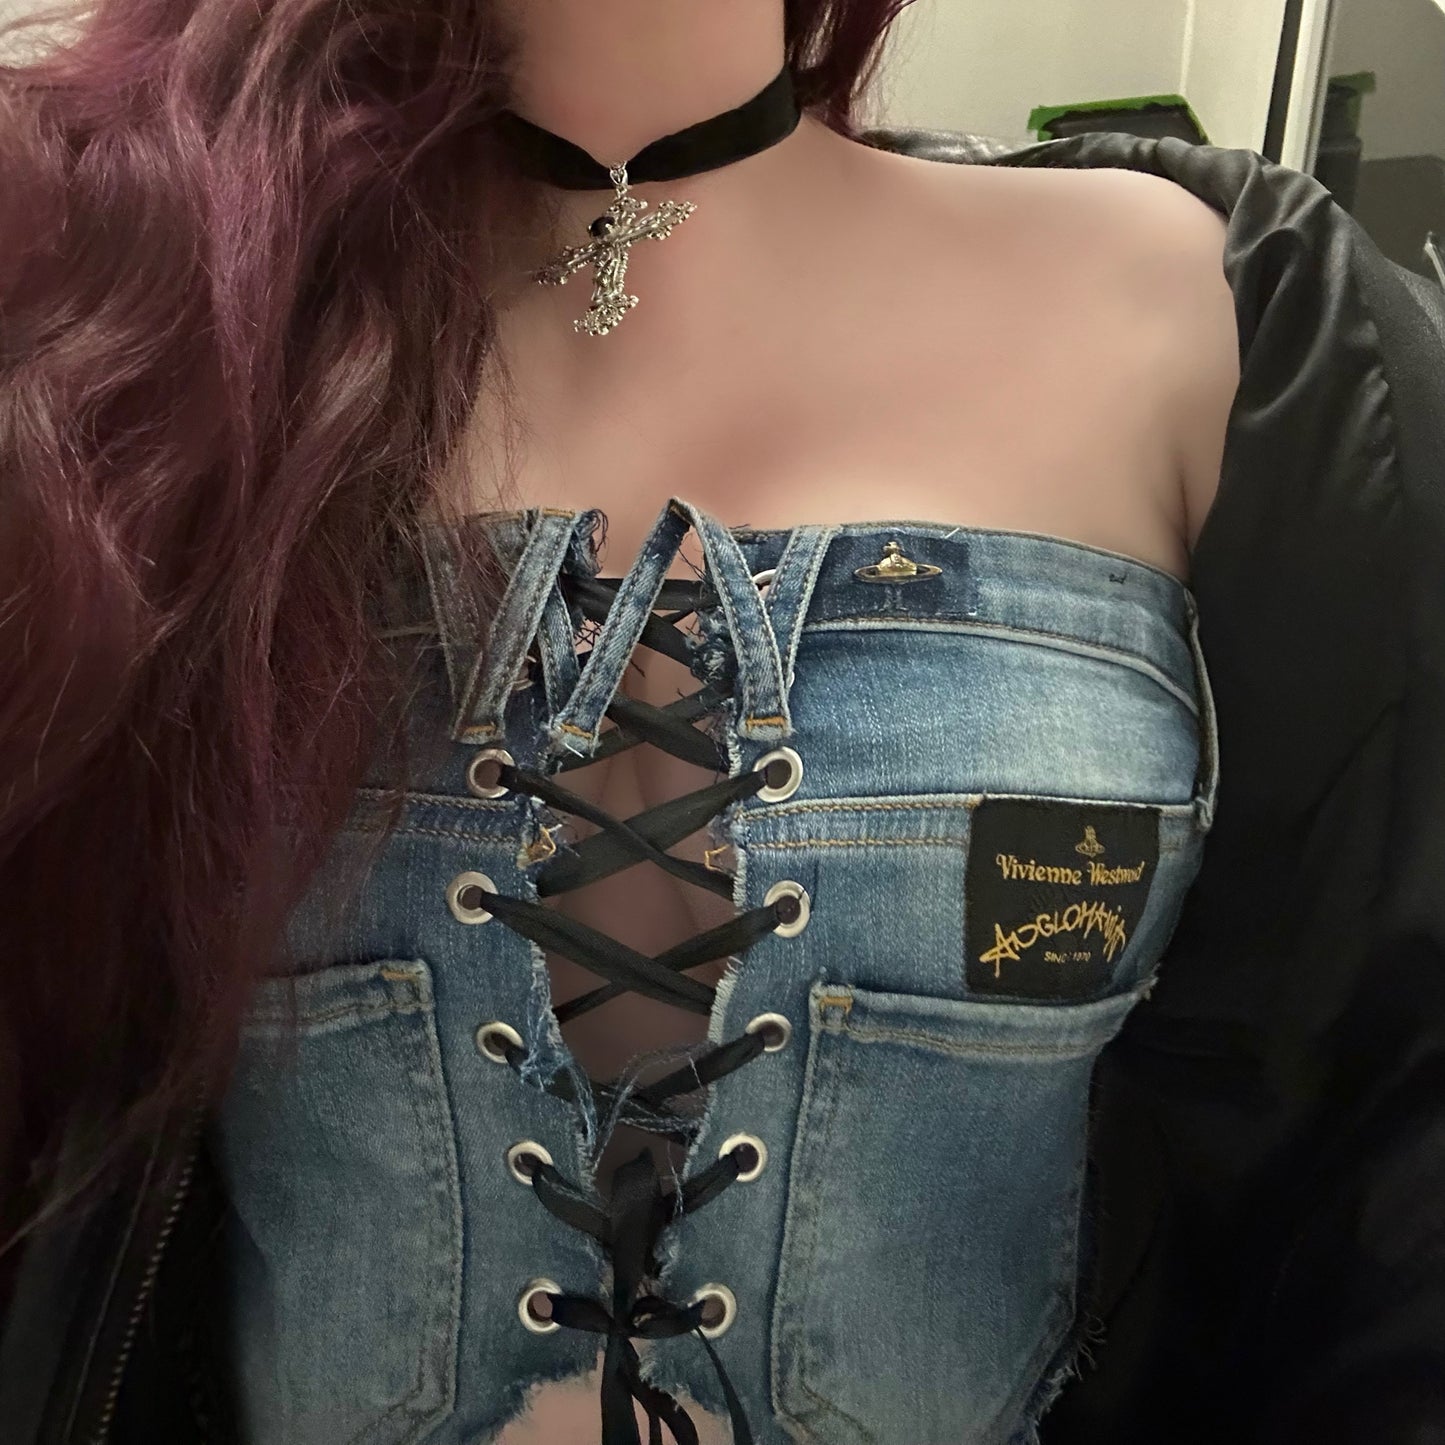 Authentic Vivienne Westwood Anglomania Jeans Reworked into a Denim Corset Top 6 8 10